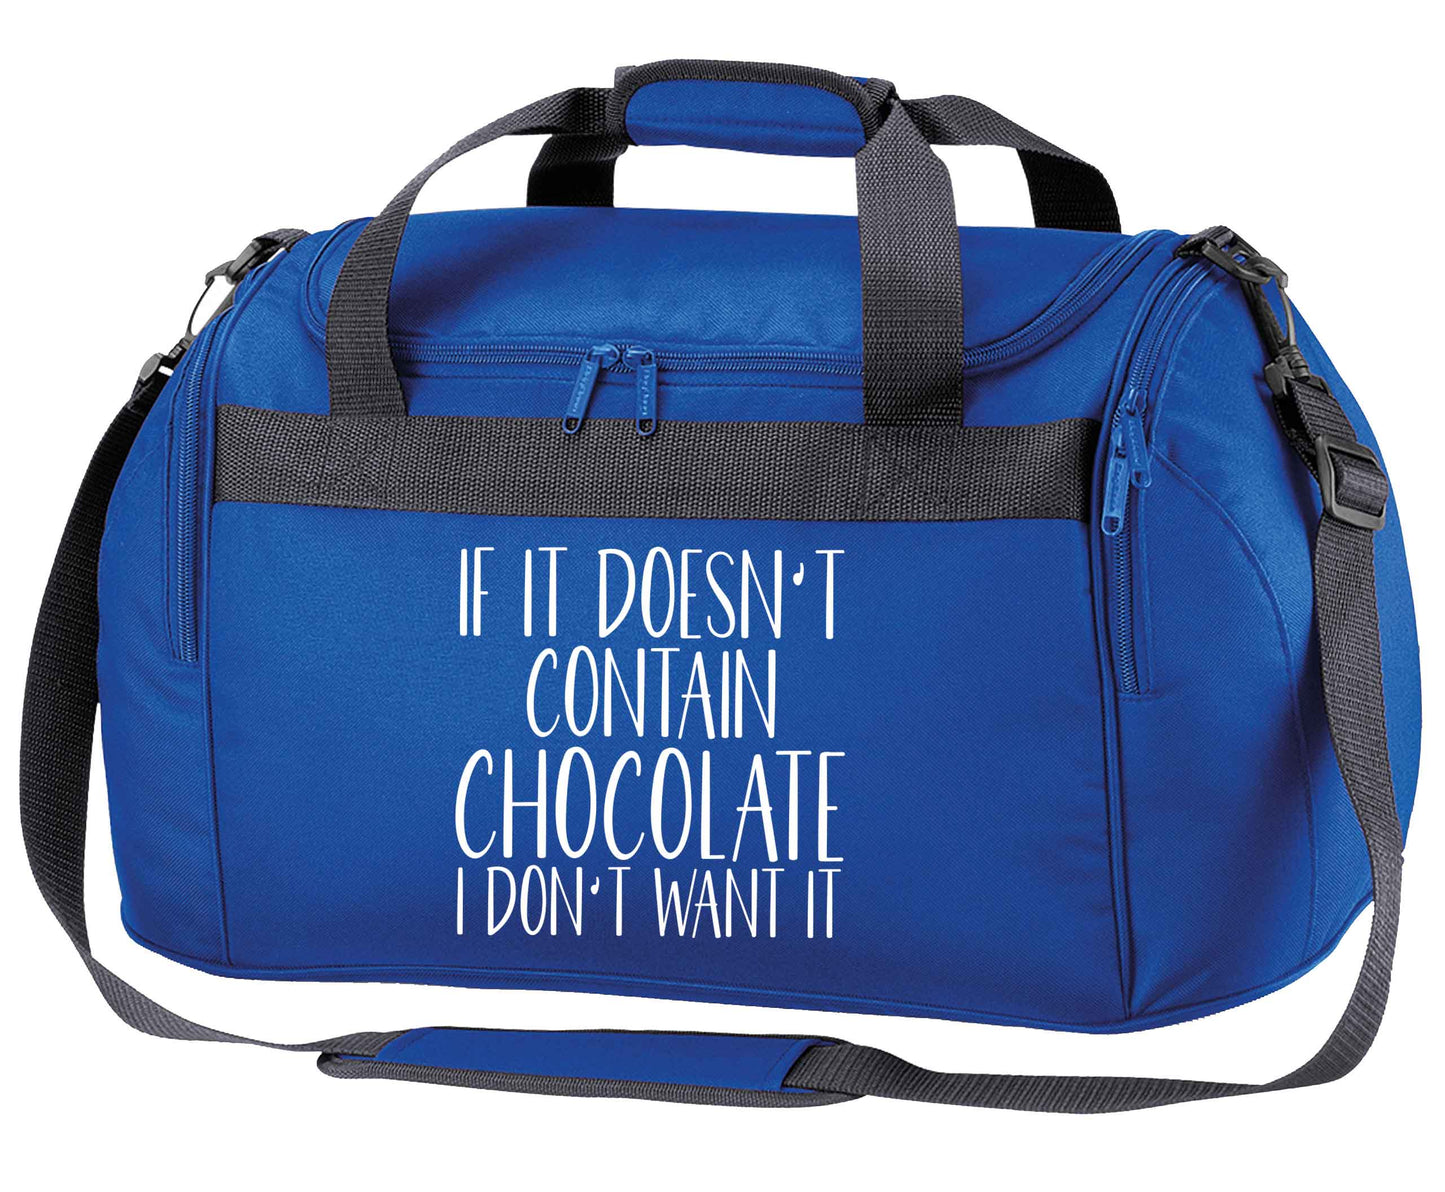 If it doesn't contain chocolate I don't want it royal blue holdall / duffel bag